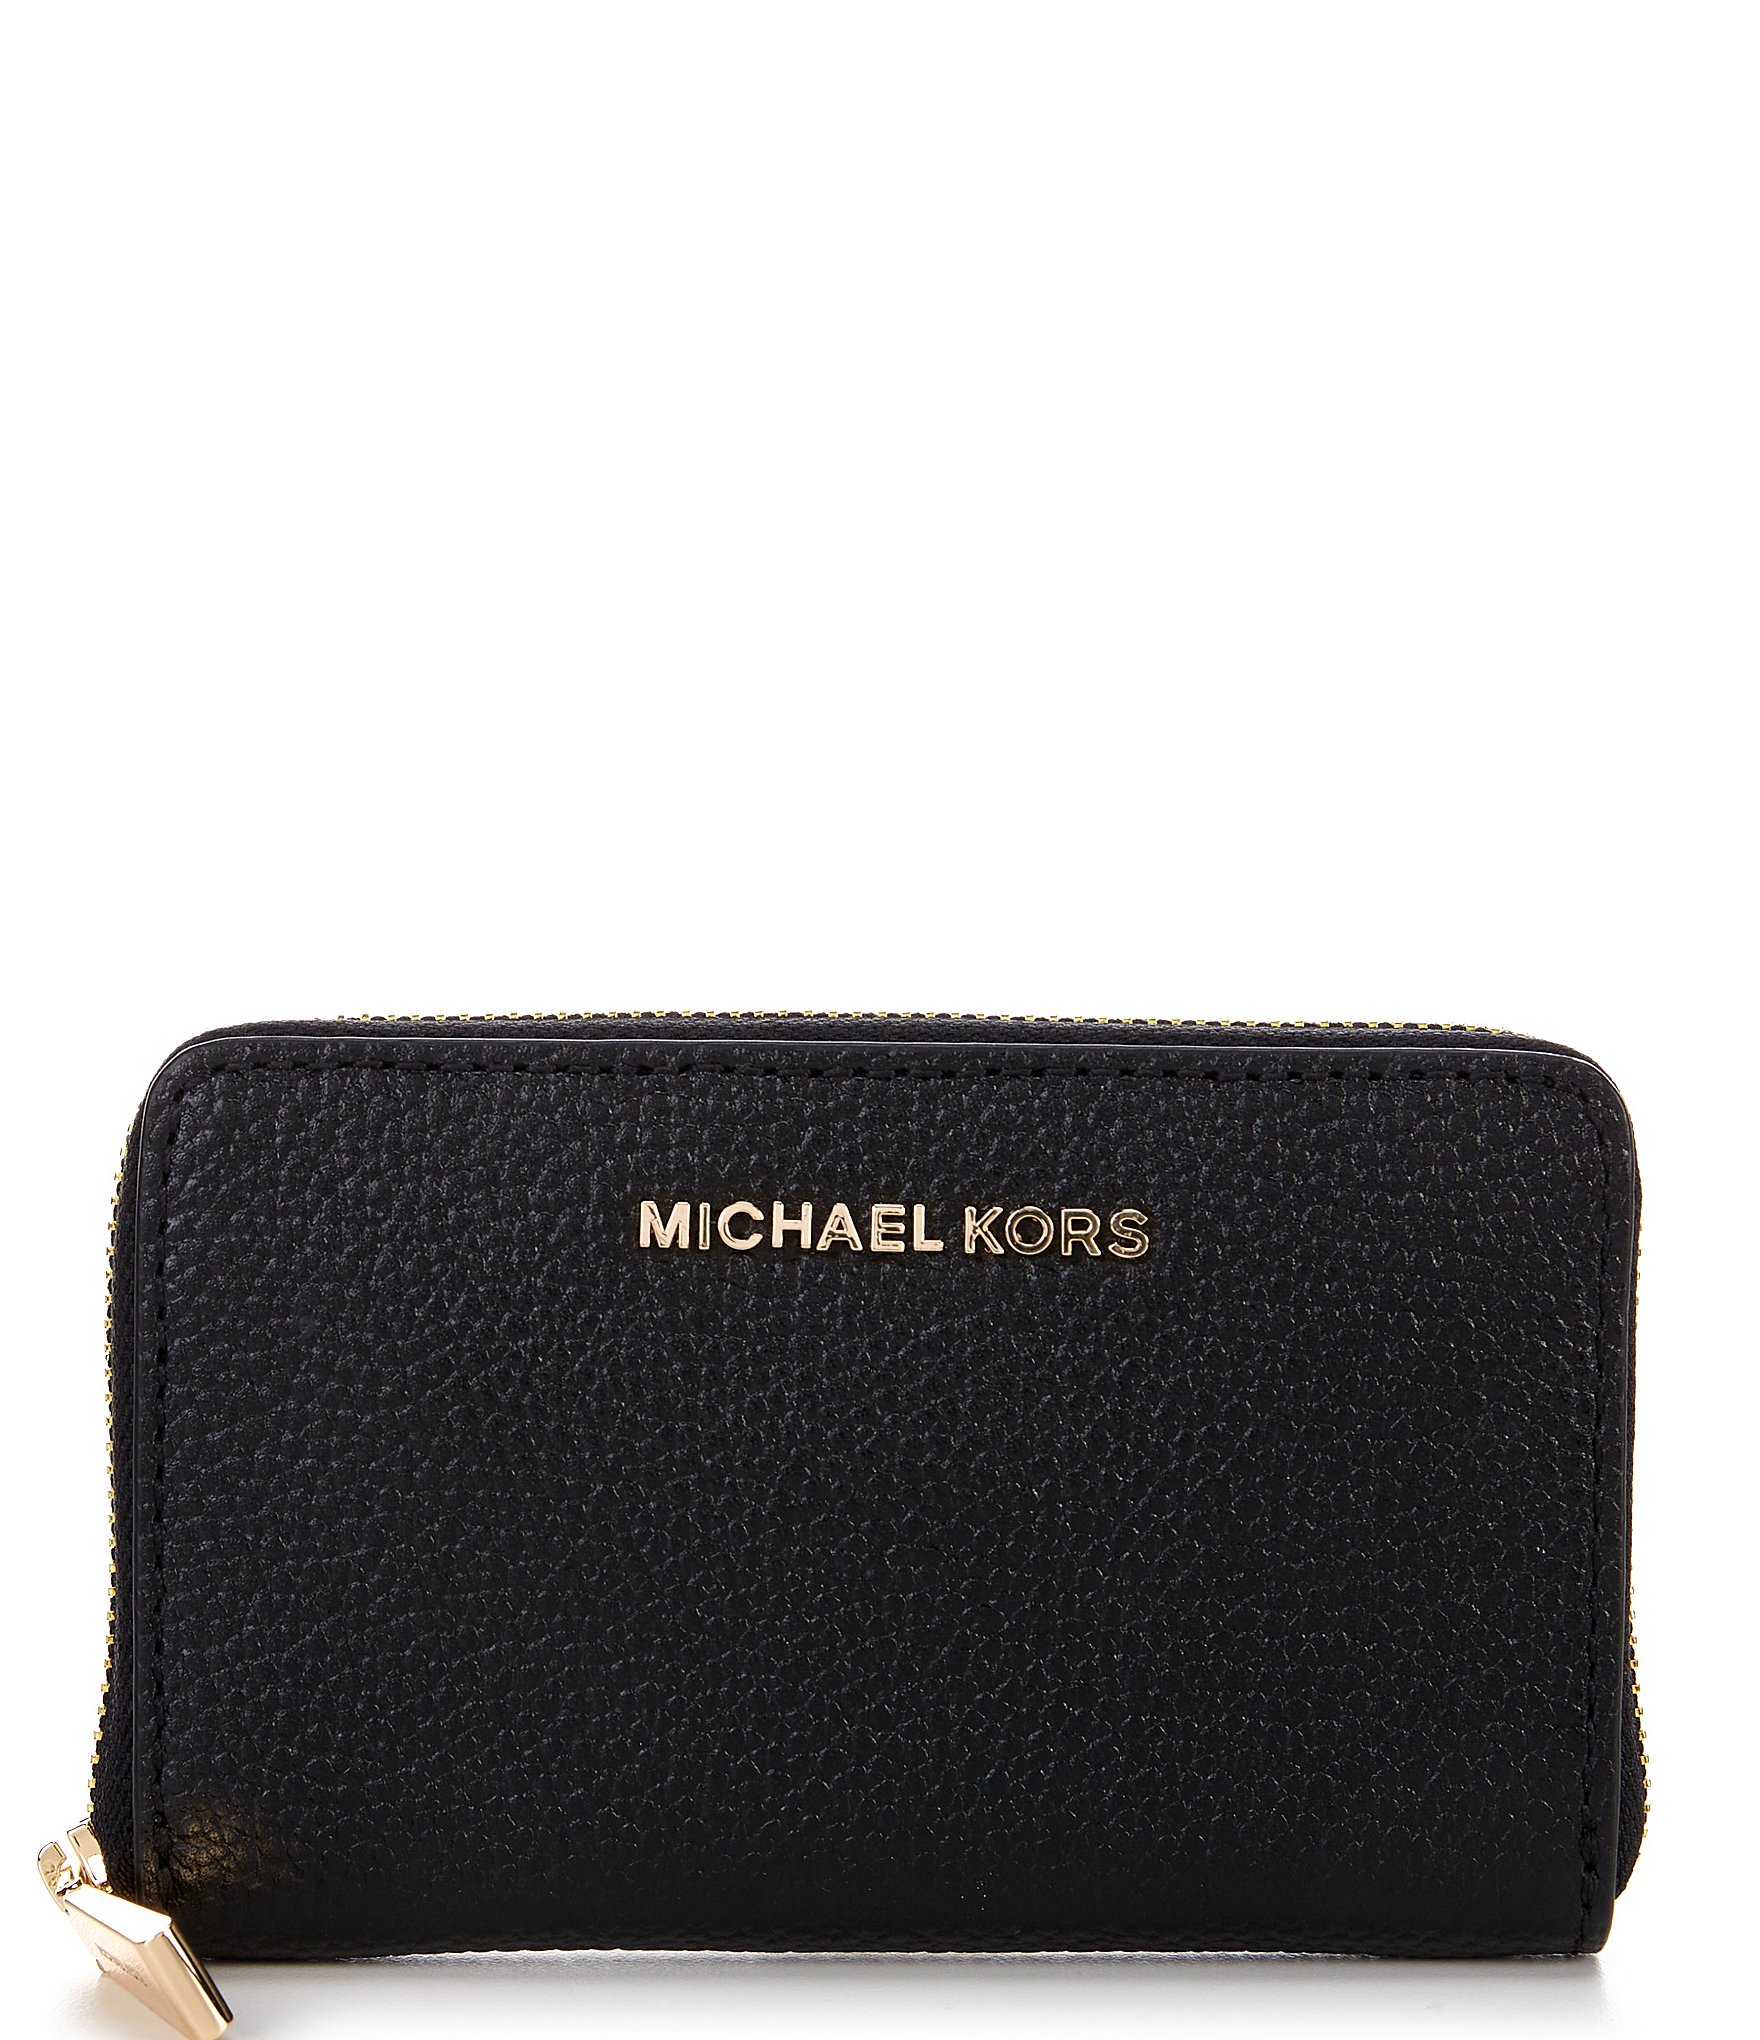 Michael Kors Jet Set Small Zip Around Gold Tone Leather Card Case ...